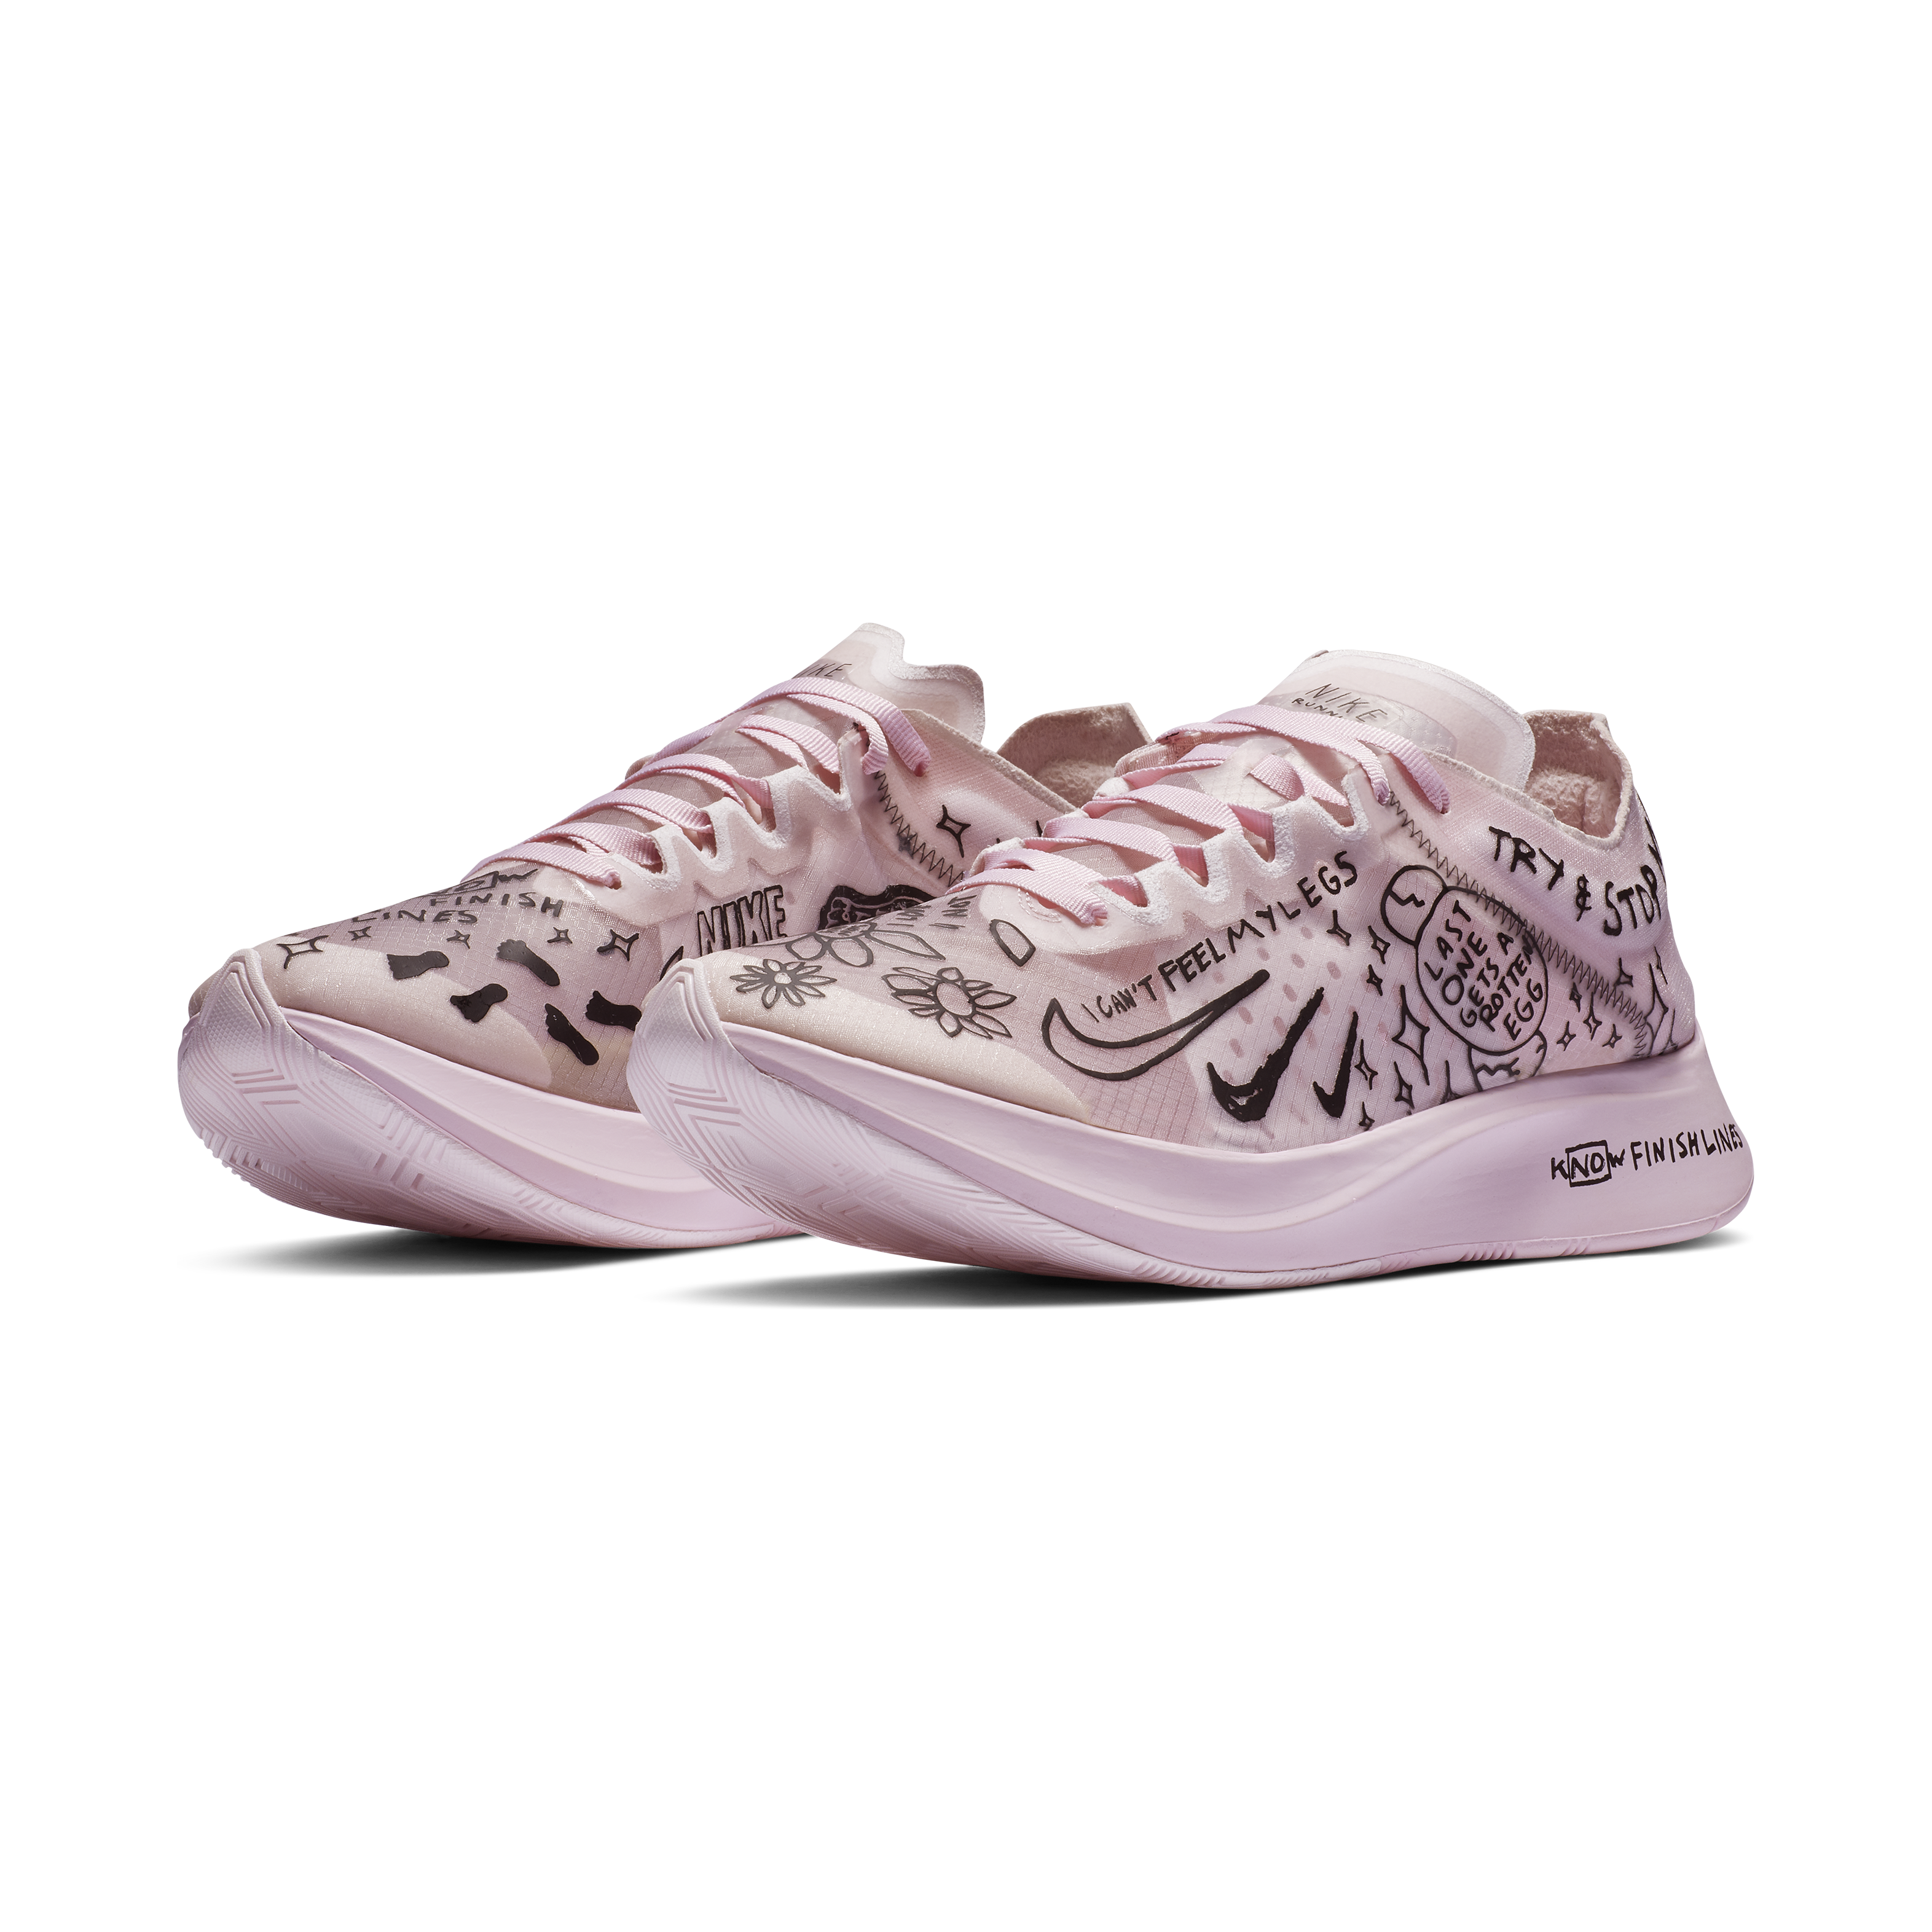 nike performance artist zoom fly sp fast